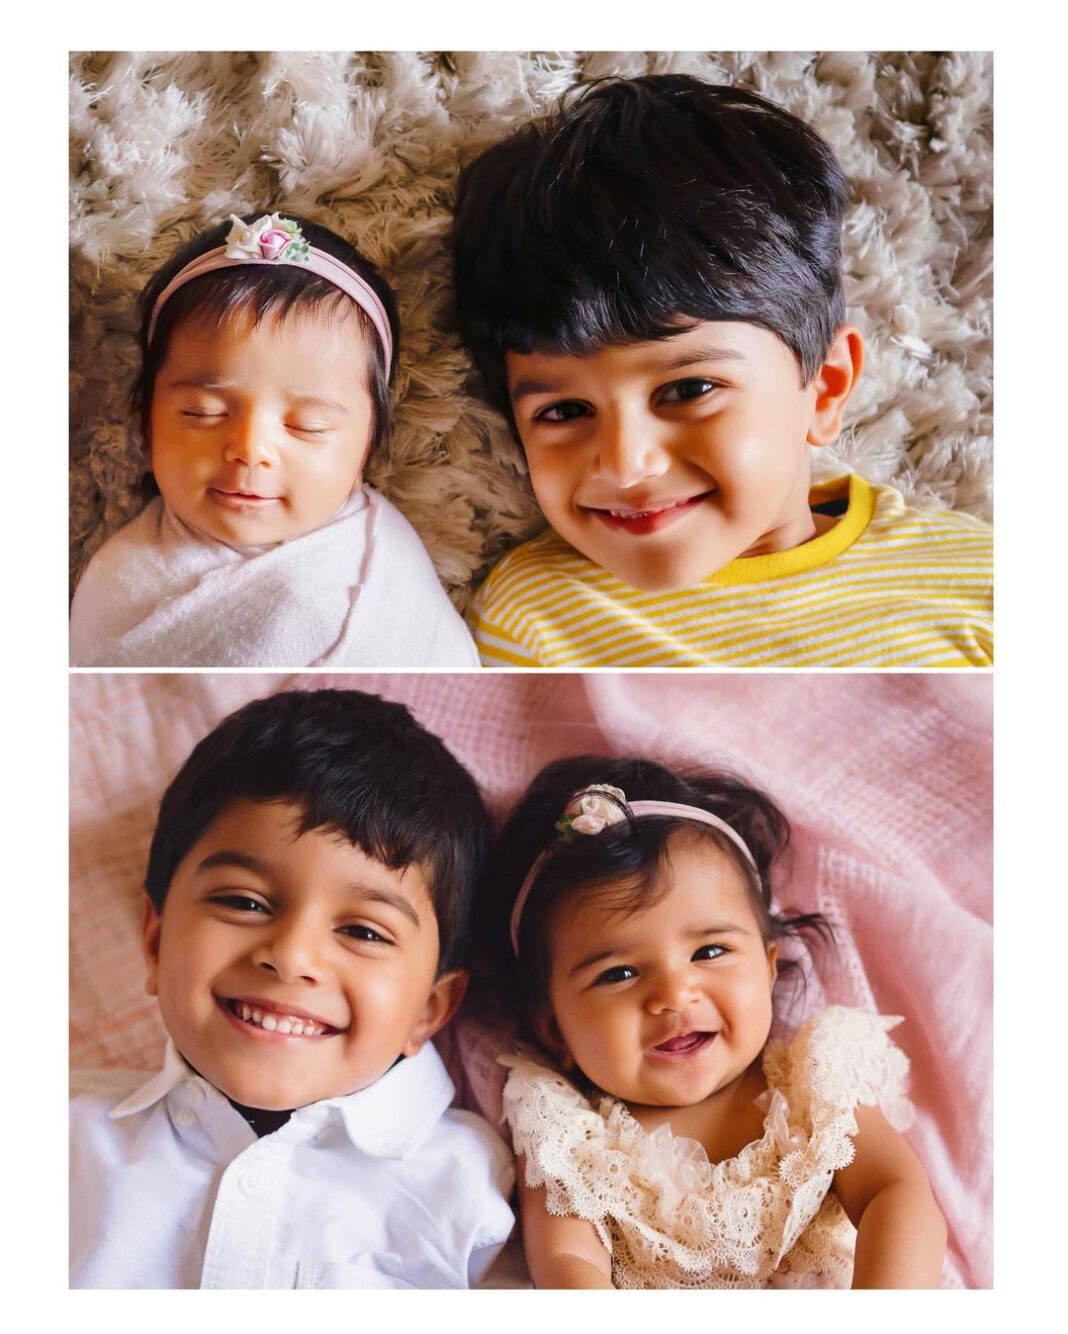 Sameera Reddy Instagram - Let me love you a little more before you are not so little anymore 😍. #timeflies .positive thoughts = positive energy 🙏🏼 #hugs @mommyshotsbyamrita . #milestonephotography #brotherandsister #mybabies #forever #positivevibesonly